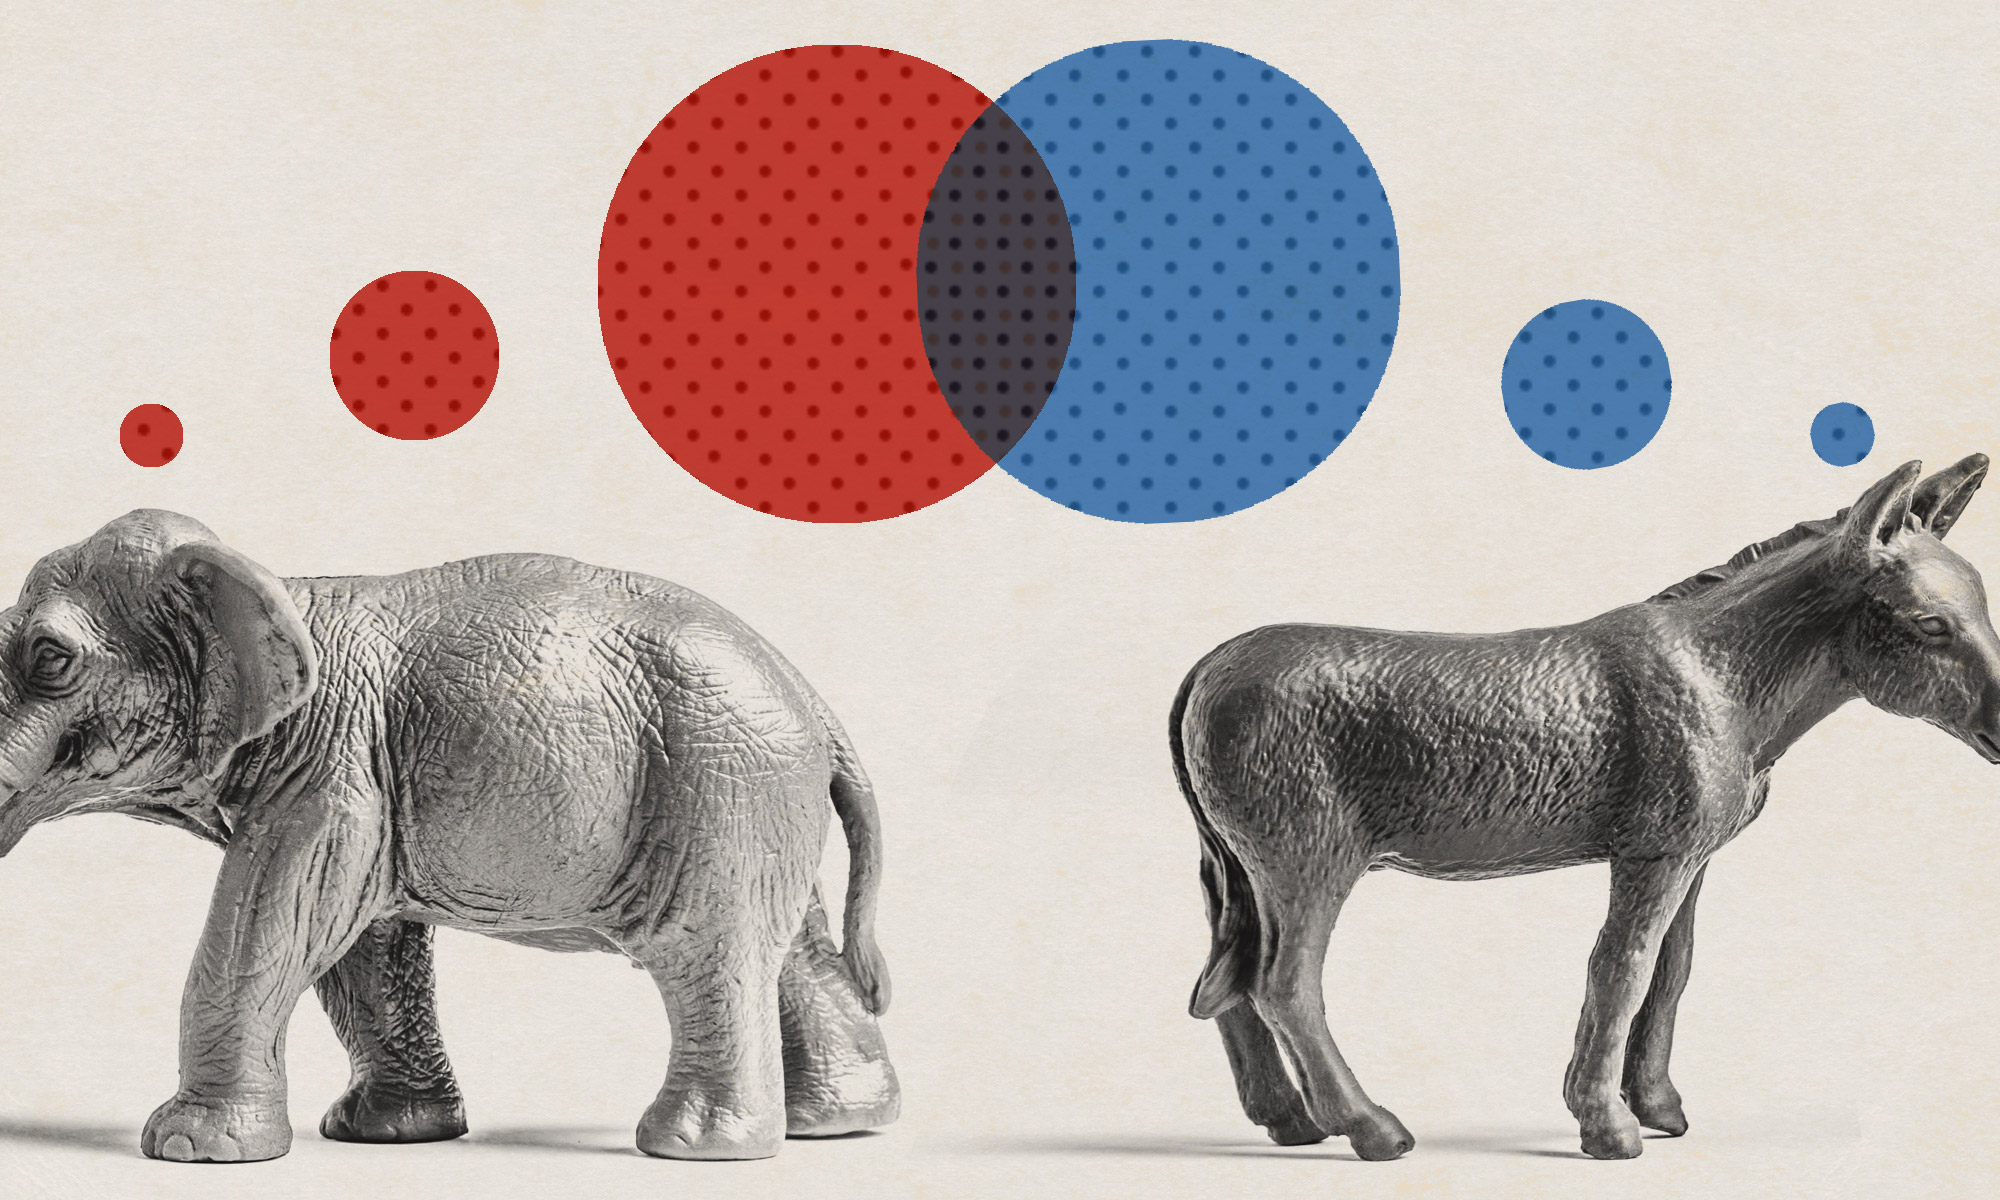 Conciencia donde quiera pista Yes, there's hope for an end to political polarization in the US 